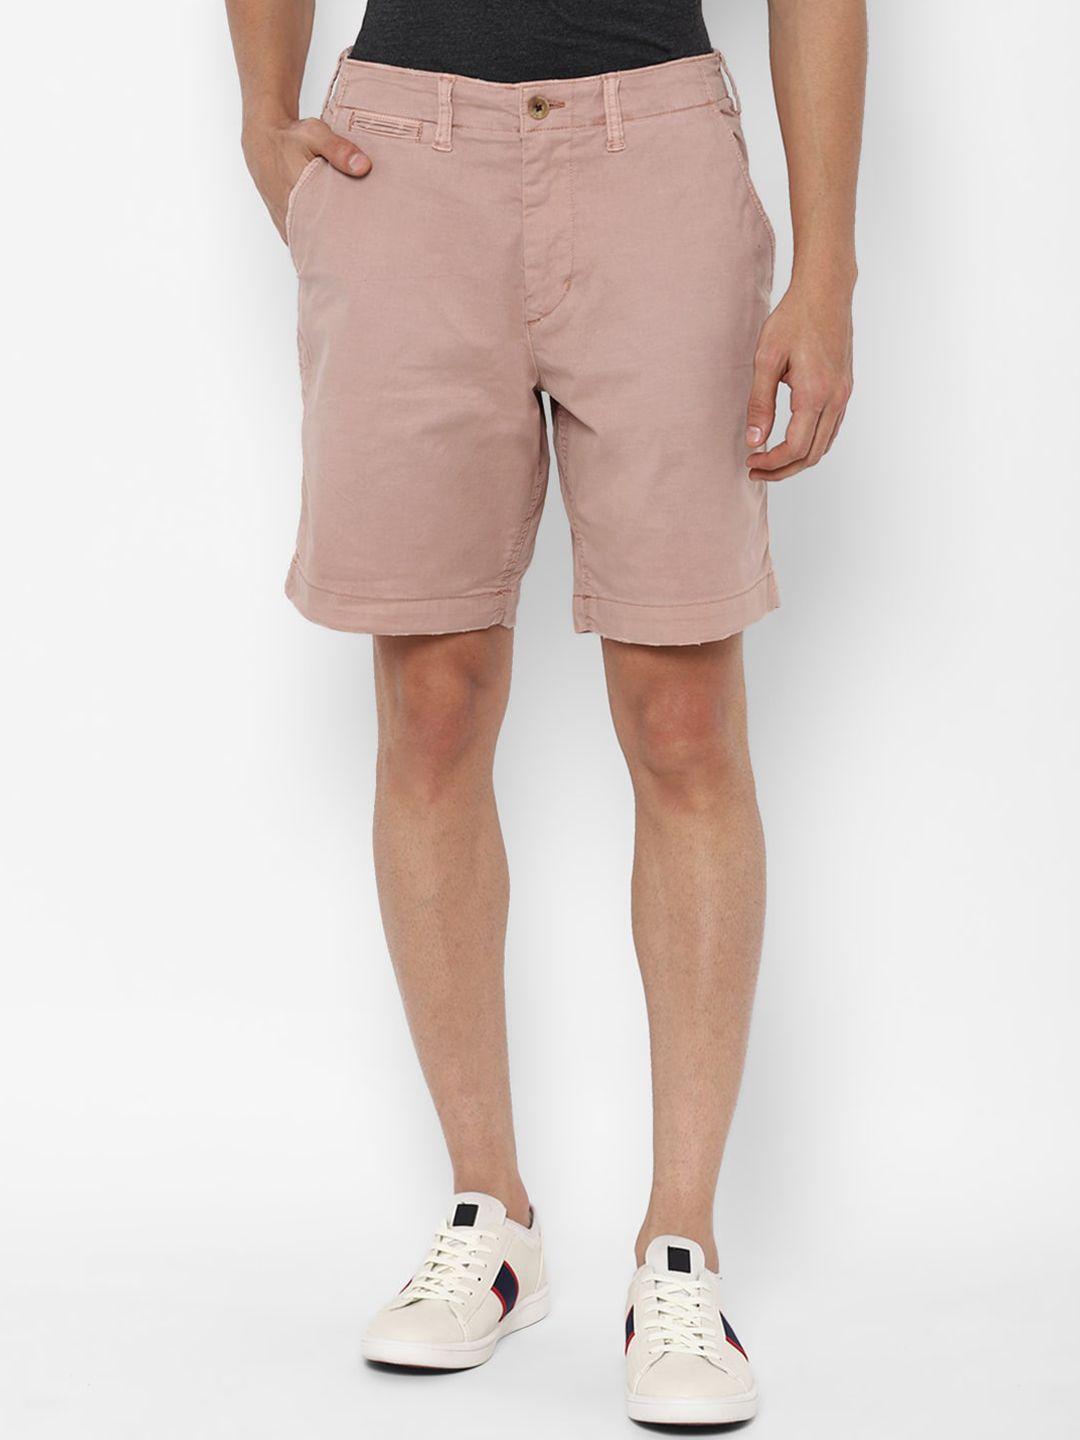 american-eagle-outfitters-men-pink-shorts